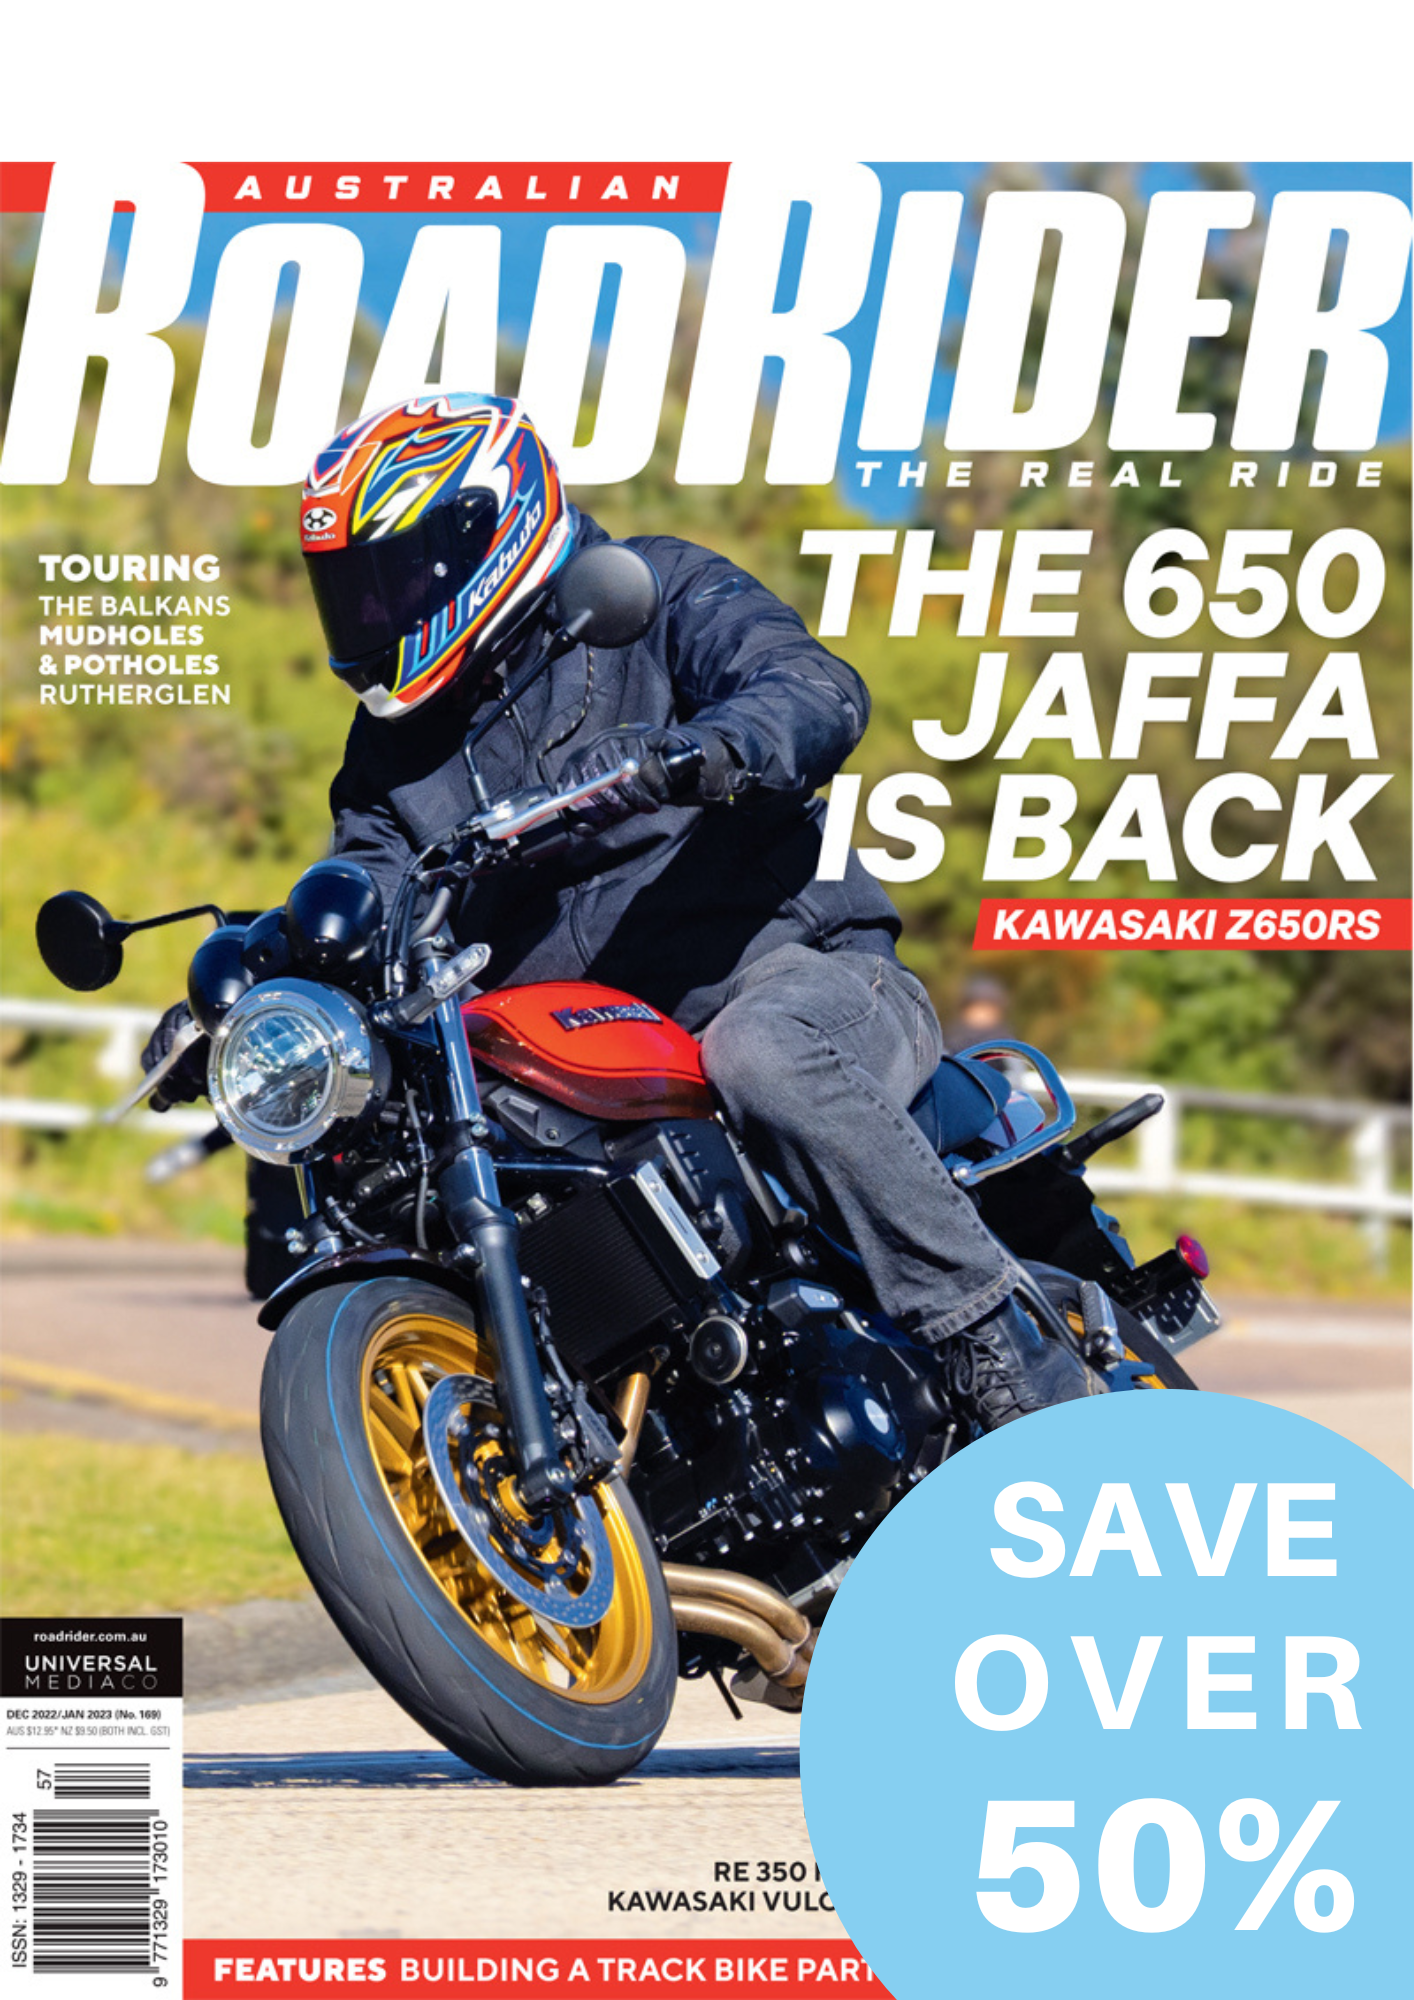 Exclusive Offer - RoadRider Subscription